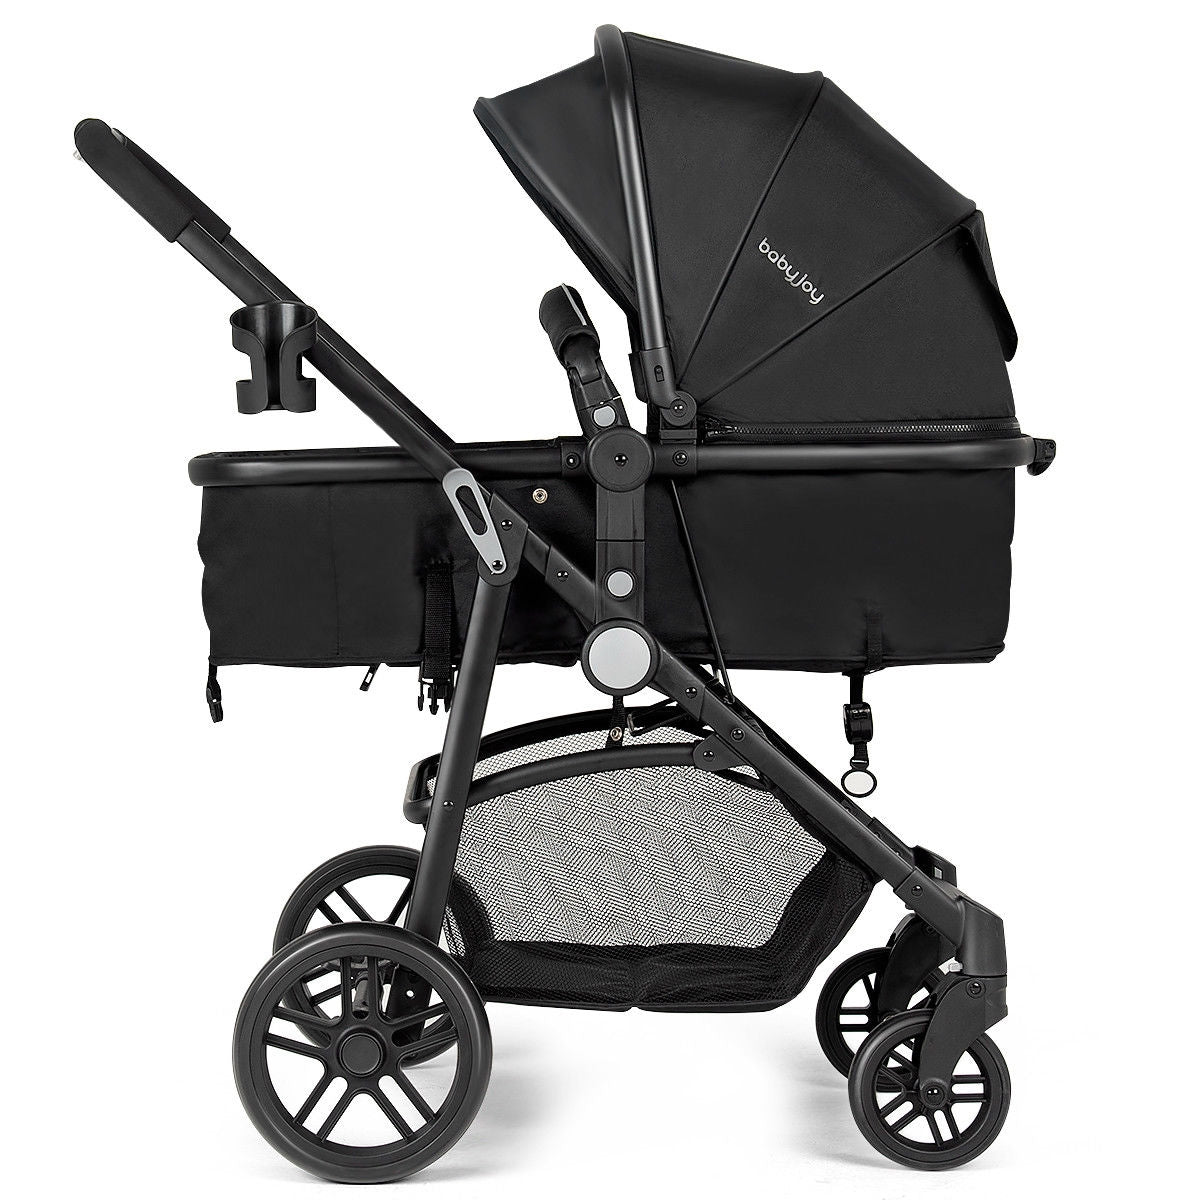 Solid and Stable Construction: Crafted from an aluminum frame and durable, non-toxic, breathable Oxford cloth cover, this stroller is durable yet lightweight for easy rolling. A breathable fabric cover protects your baby from rain or harmful rays. In addition, the car has a built-in shock absorber with high stability and meets the American ASTM safety standards.